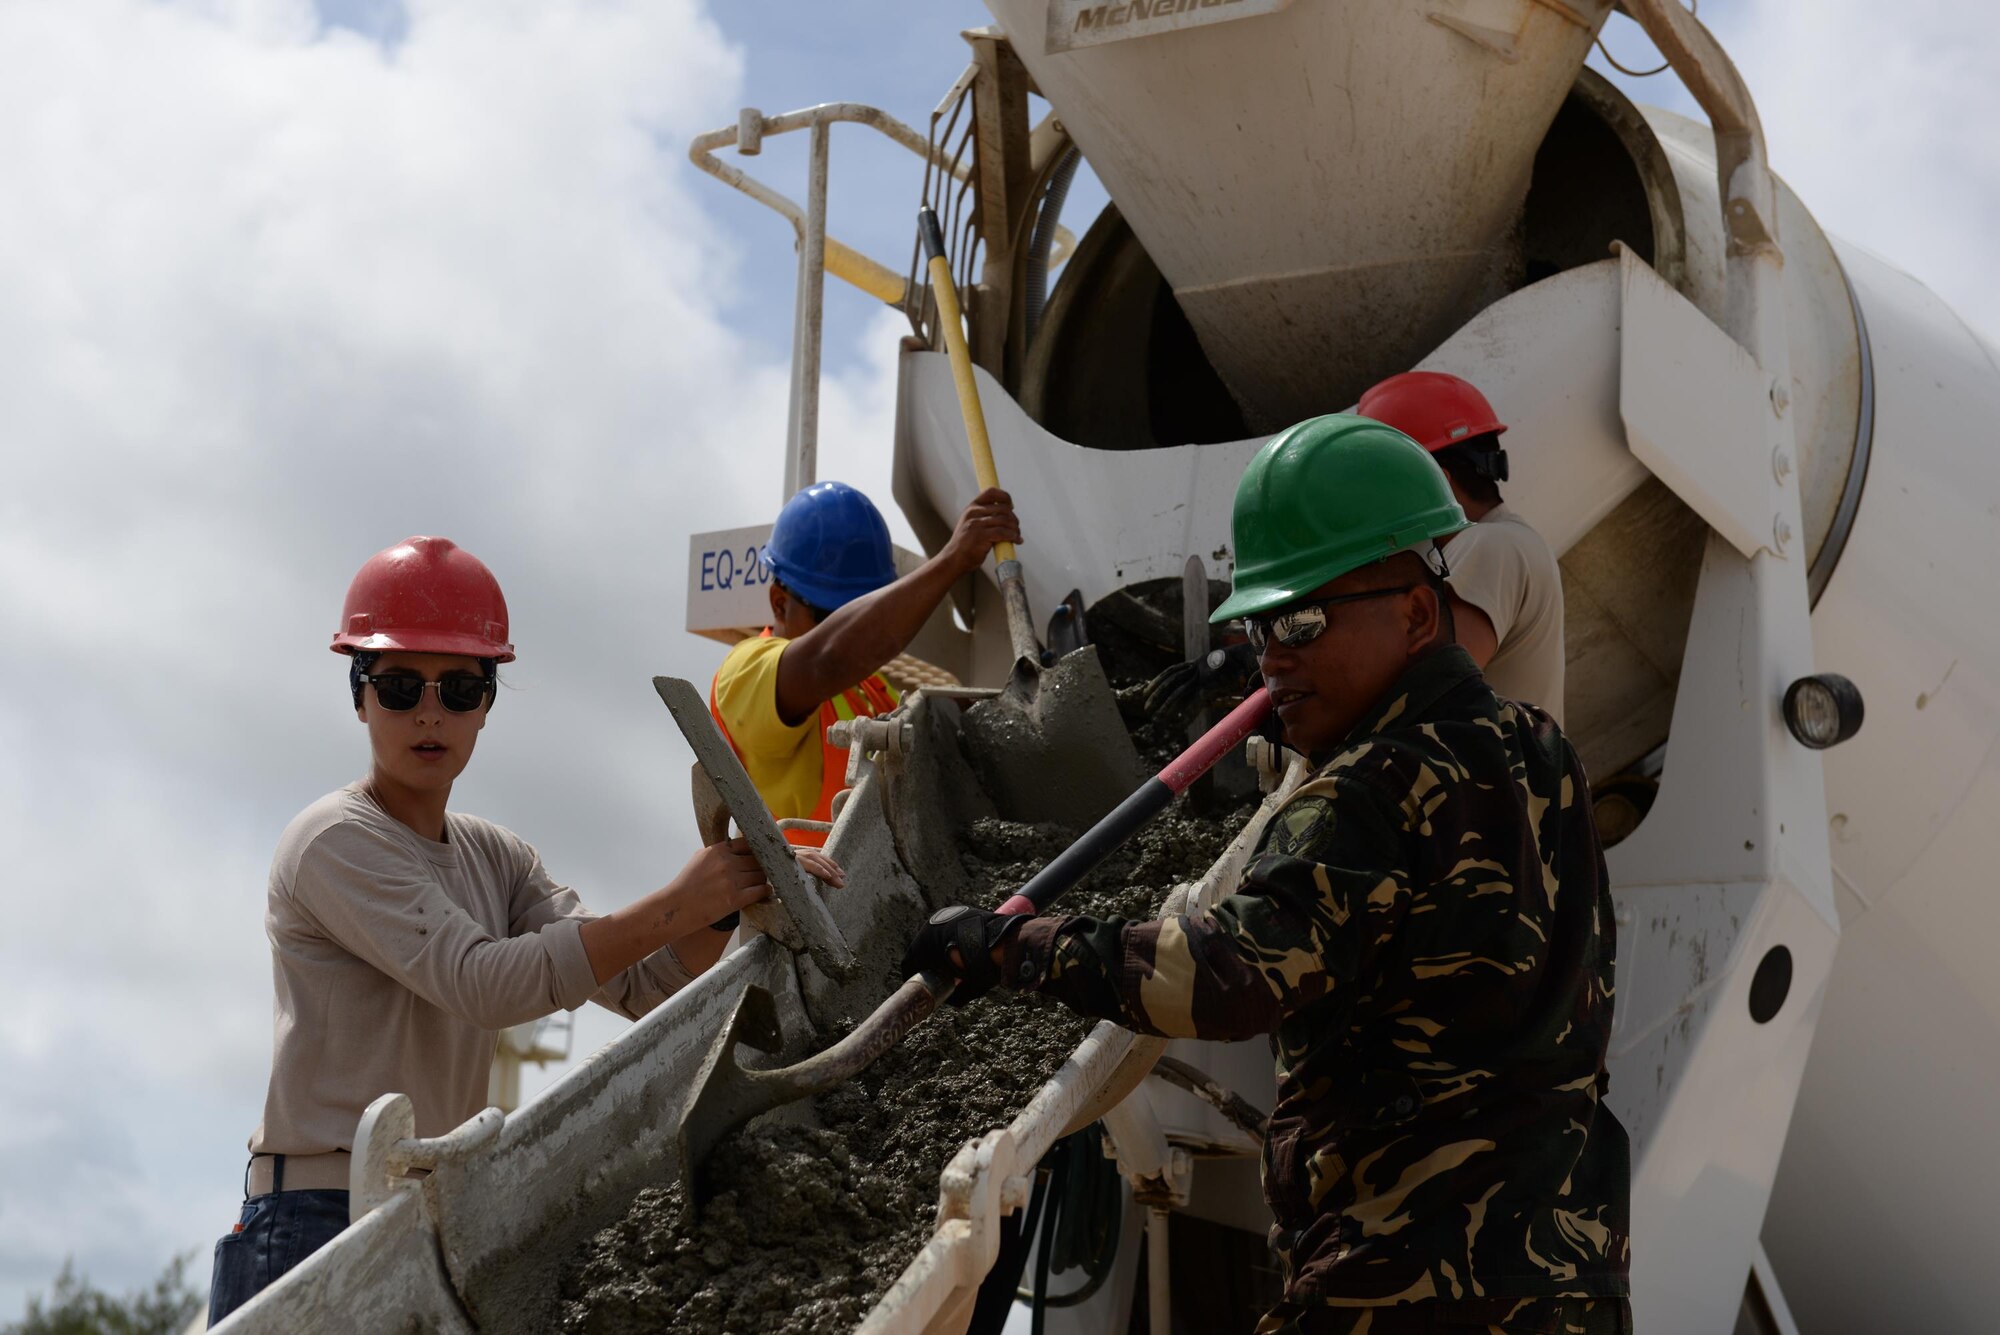 U.S. and Philippine Airmen push concrete from a cement truck during a Pacific Unity tilt-up workshop May 18, 2016, at Andersen Air Force Base, Guam. Pacific Unity events are designed to build partnerships and promote interoperability through the equitable exchange of civil engineer related information. (U.S. Air Force photo by Airman 1st Class Jacob Skovo)